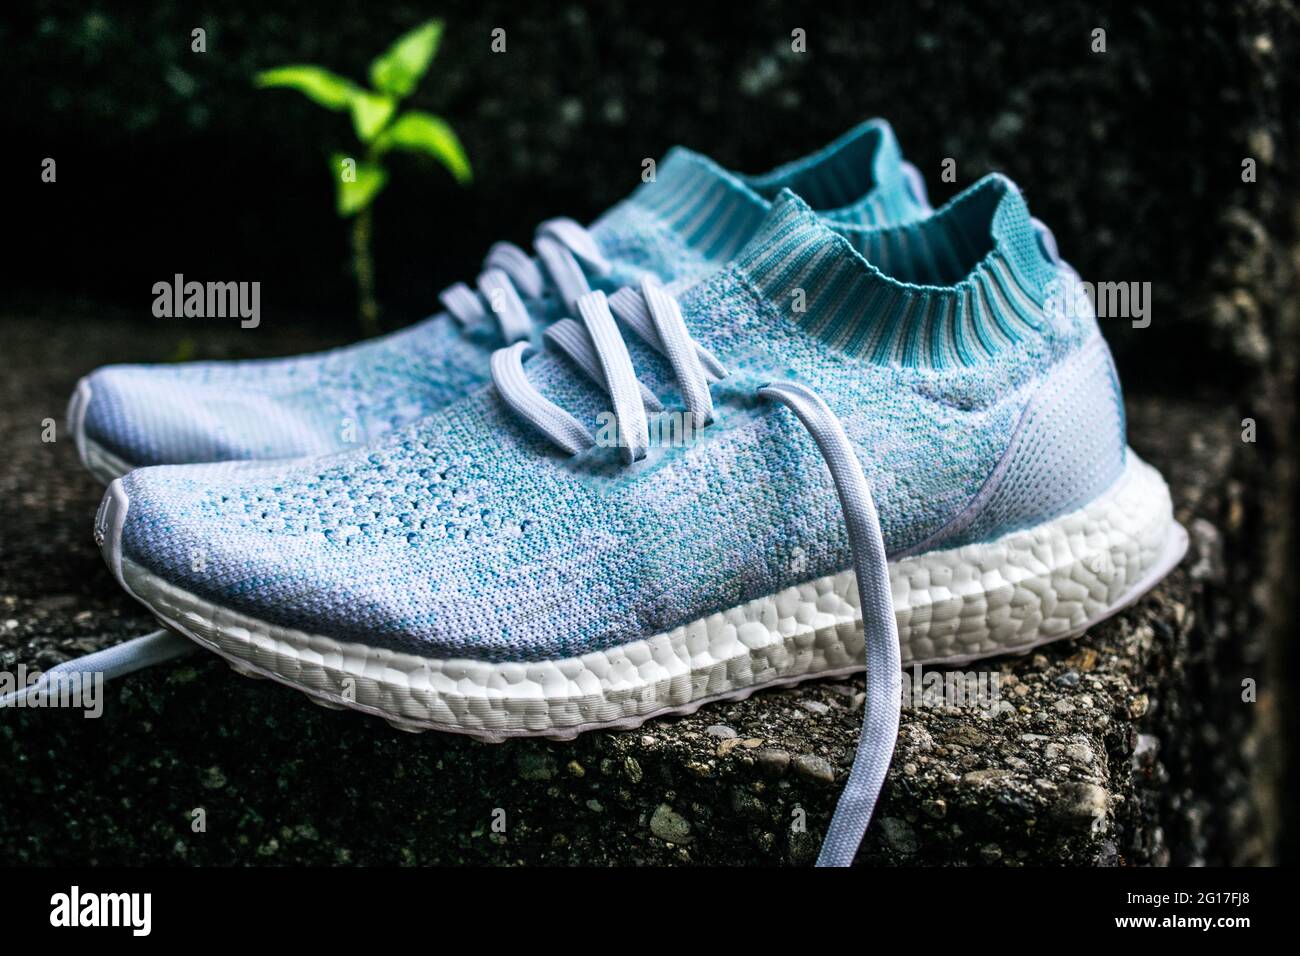 adidas Ultraboost Parley are environmentally friendly running shoes with the same silhouette and midsole as regular Ultraboost shoes. Stock Photo